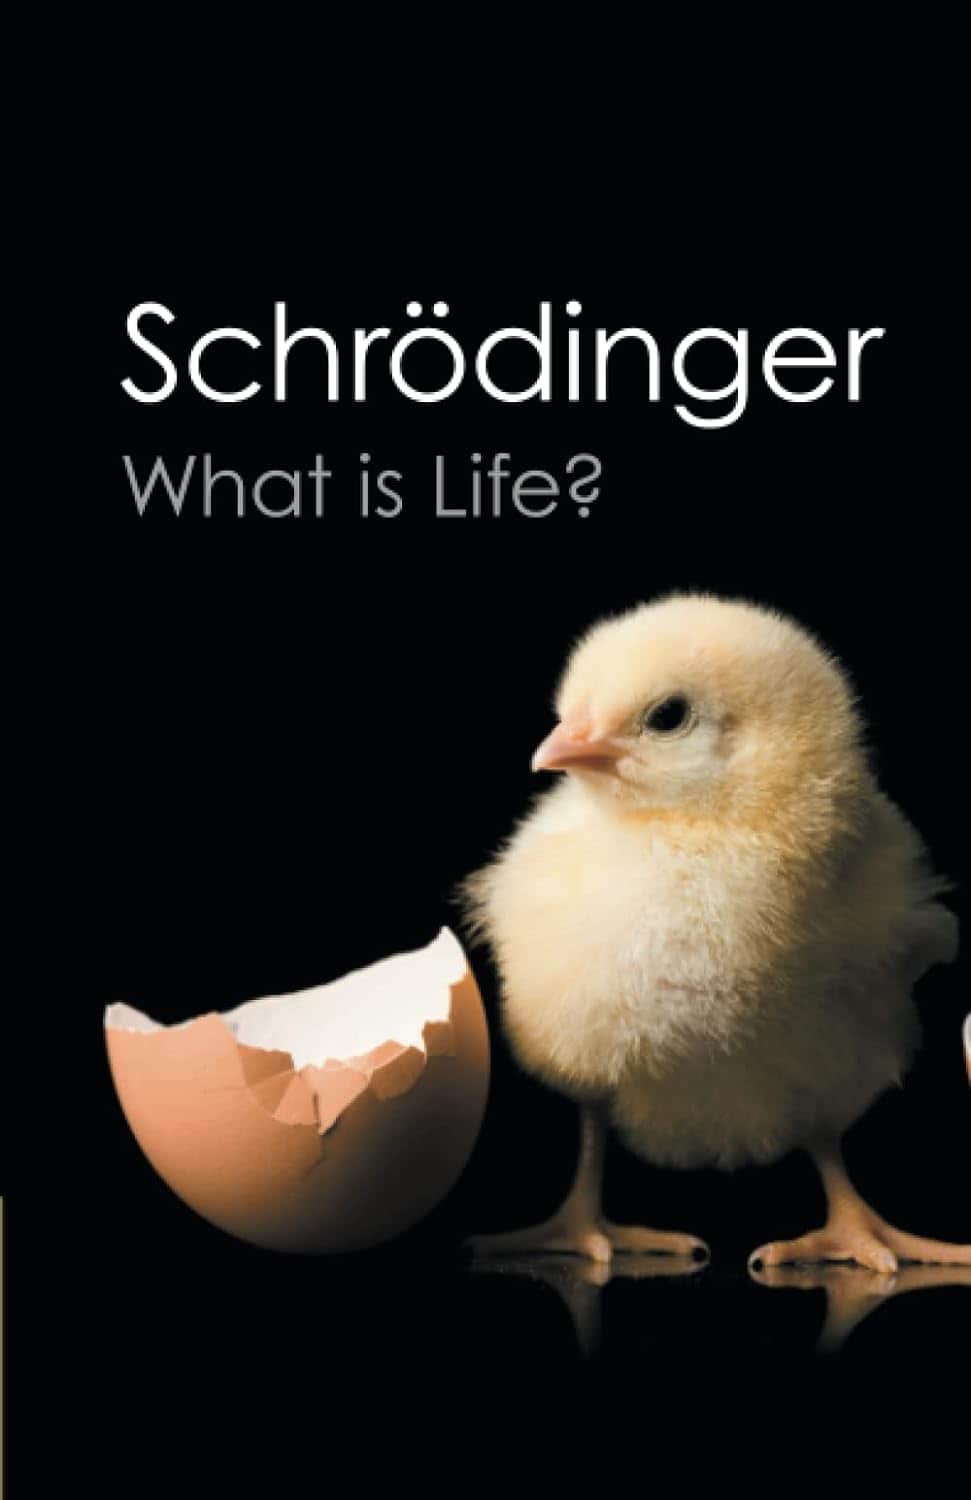 What Is Life by Erwin Schrödinger (1944)